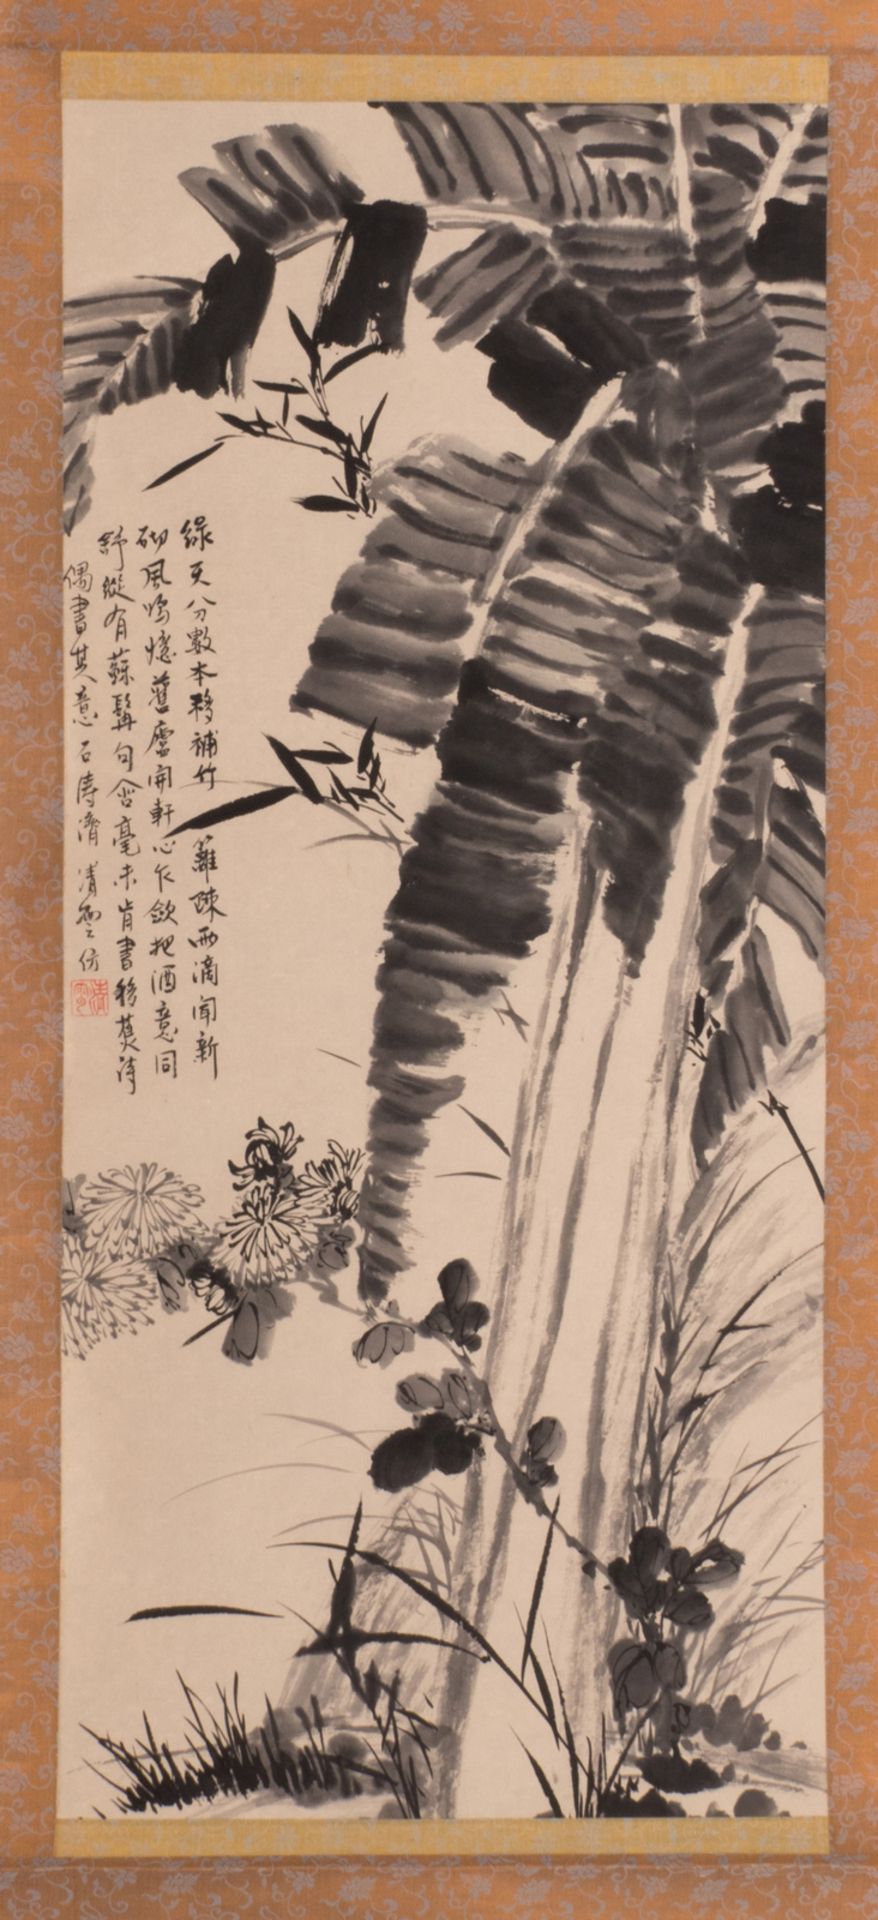 A Chinese scroll depicting various flowers and vegetation, Indian ink, 44,8 x 100,4 - 55,8 x 123